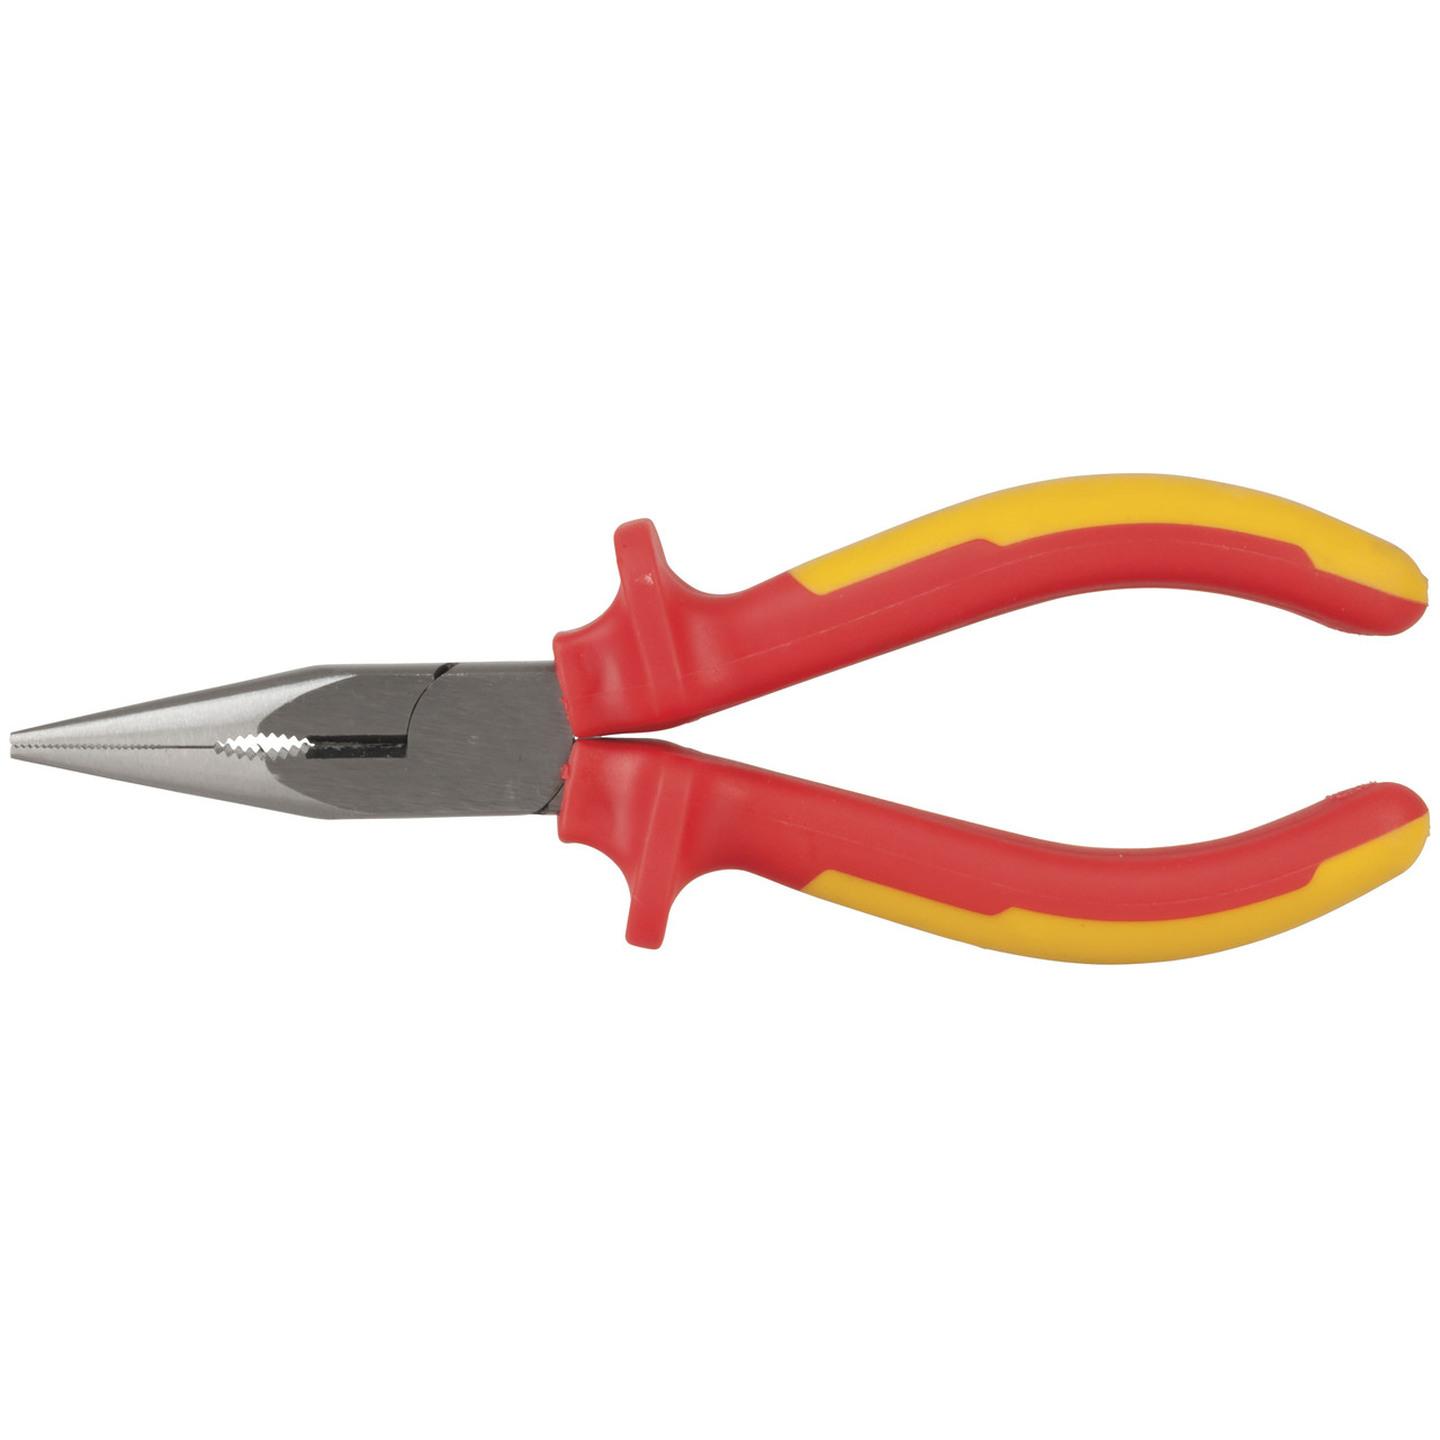 6.5inch Long Nose Pliers